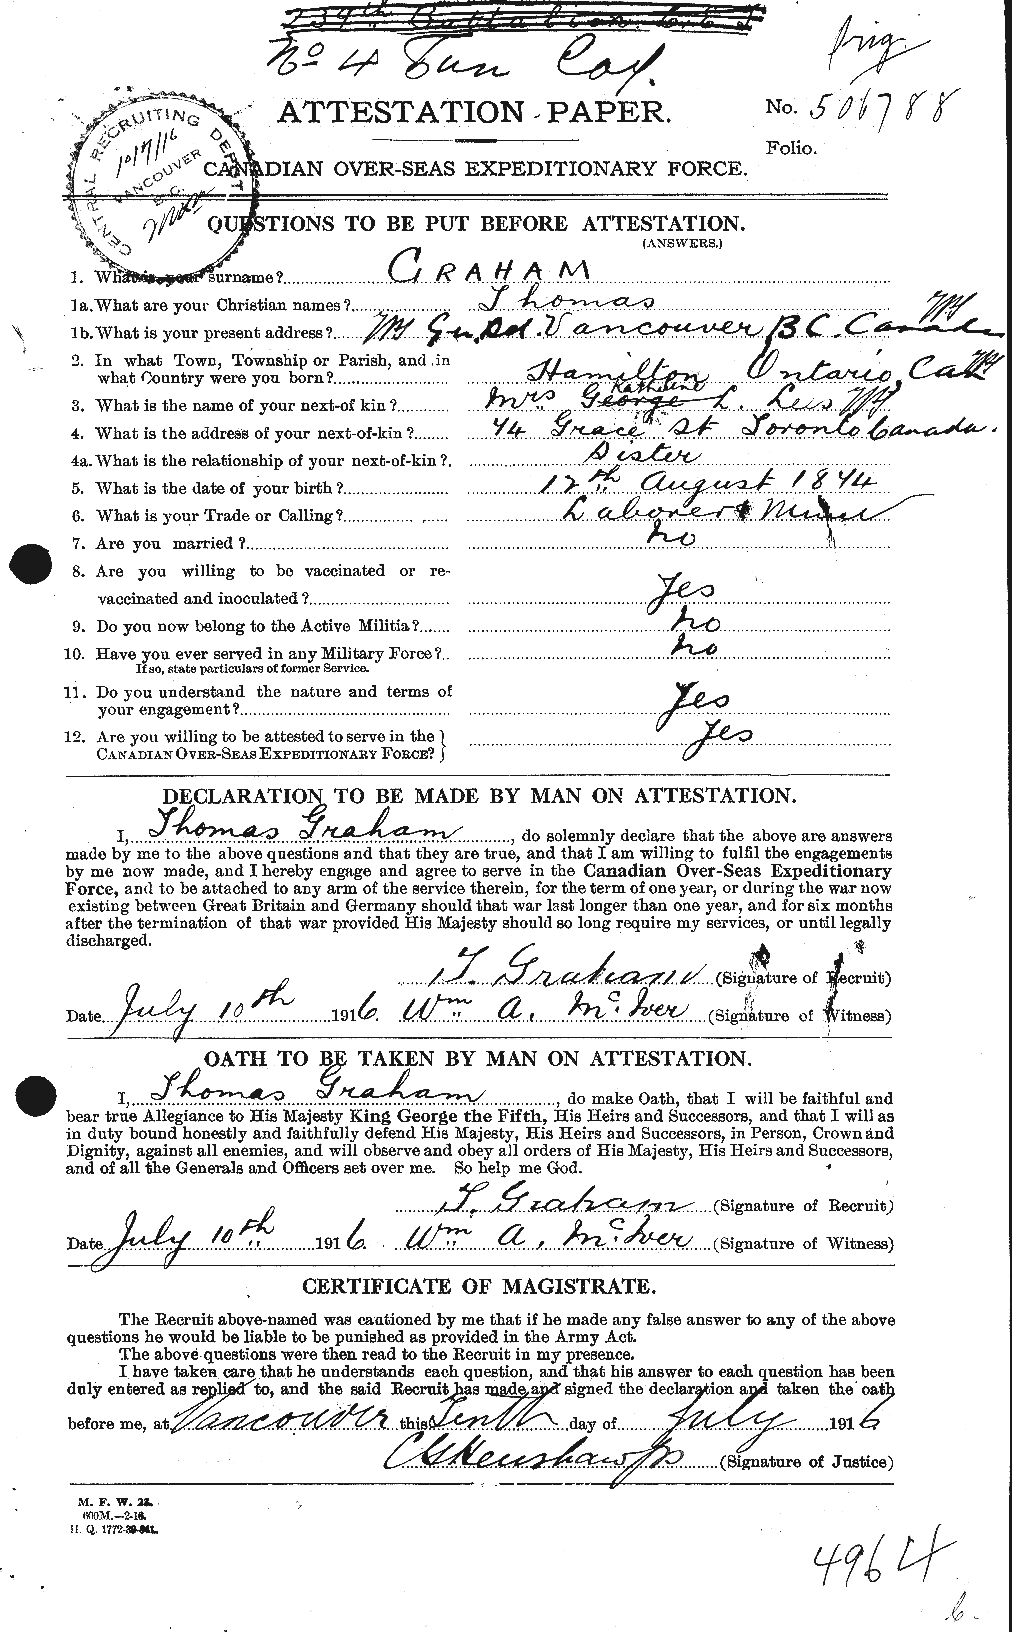 Personnel Records of the First World War - CEF 359496a